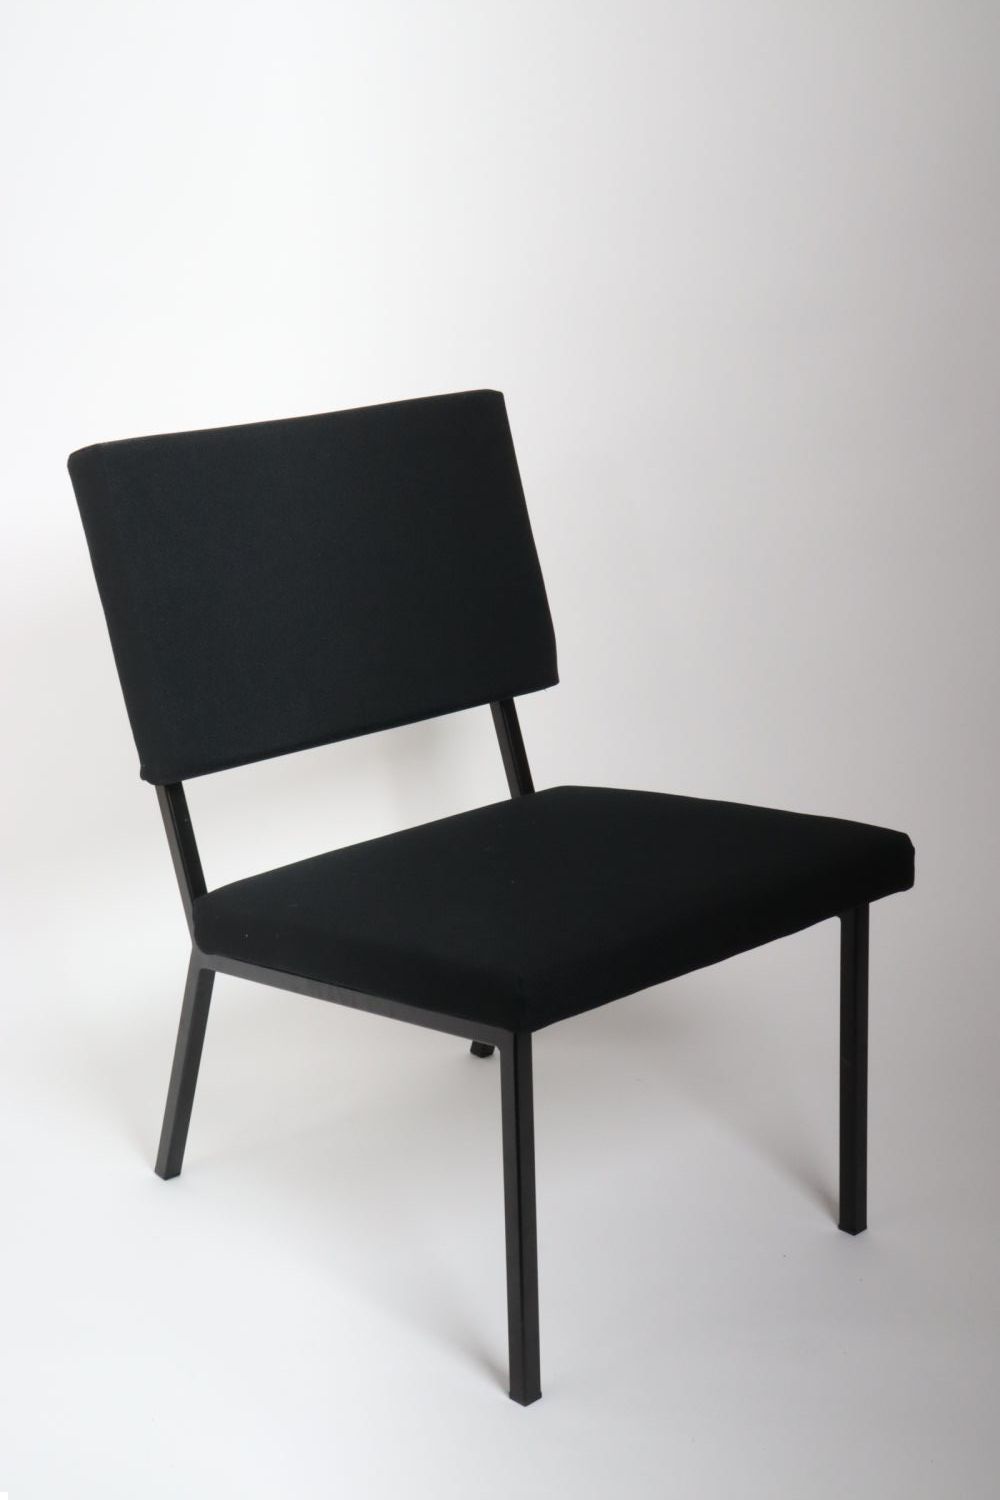 gerrit veenendaal 501 low chair without armrests